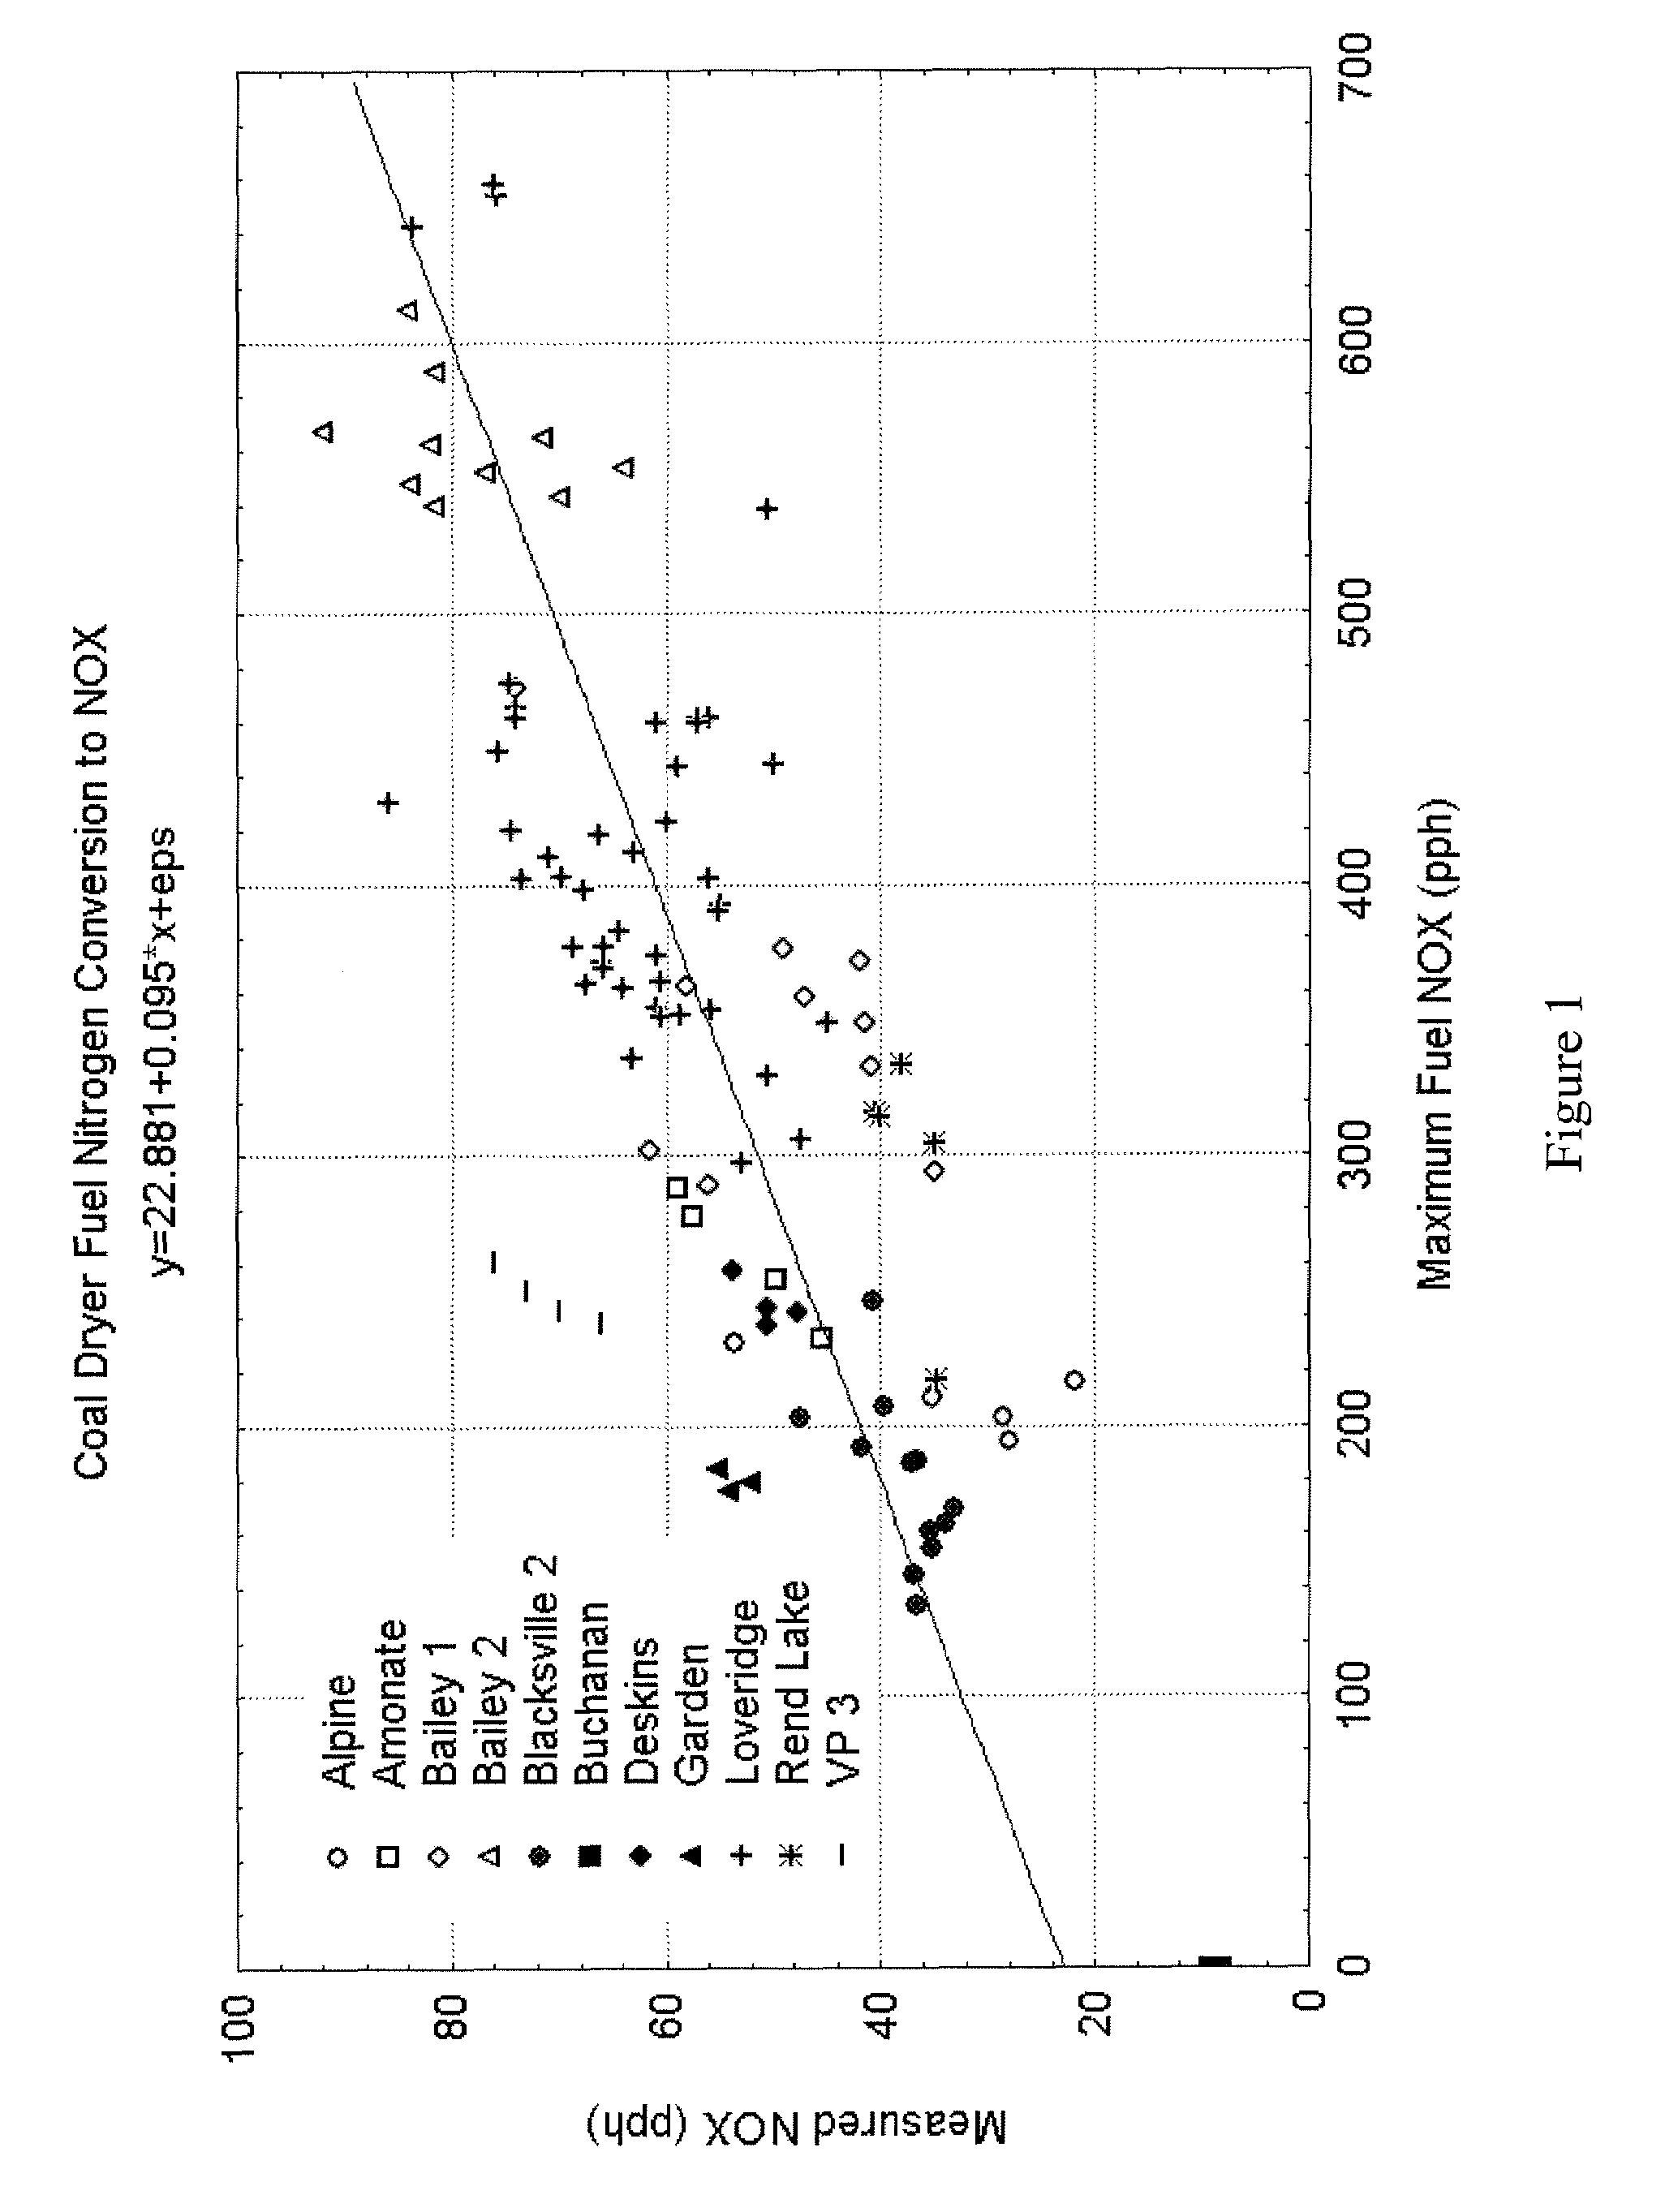 Apparatus for reducing NOx emissions in furnaces through the concentration of solid fuel as compared to air